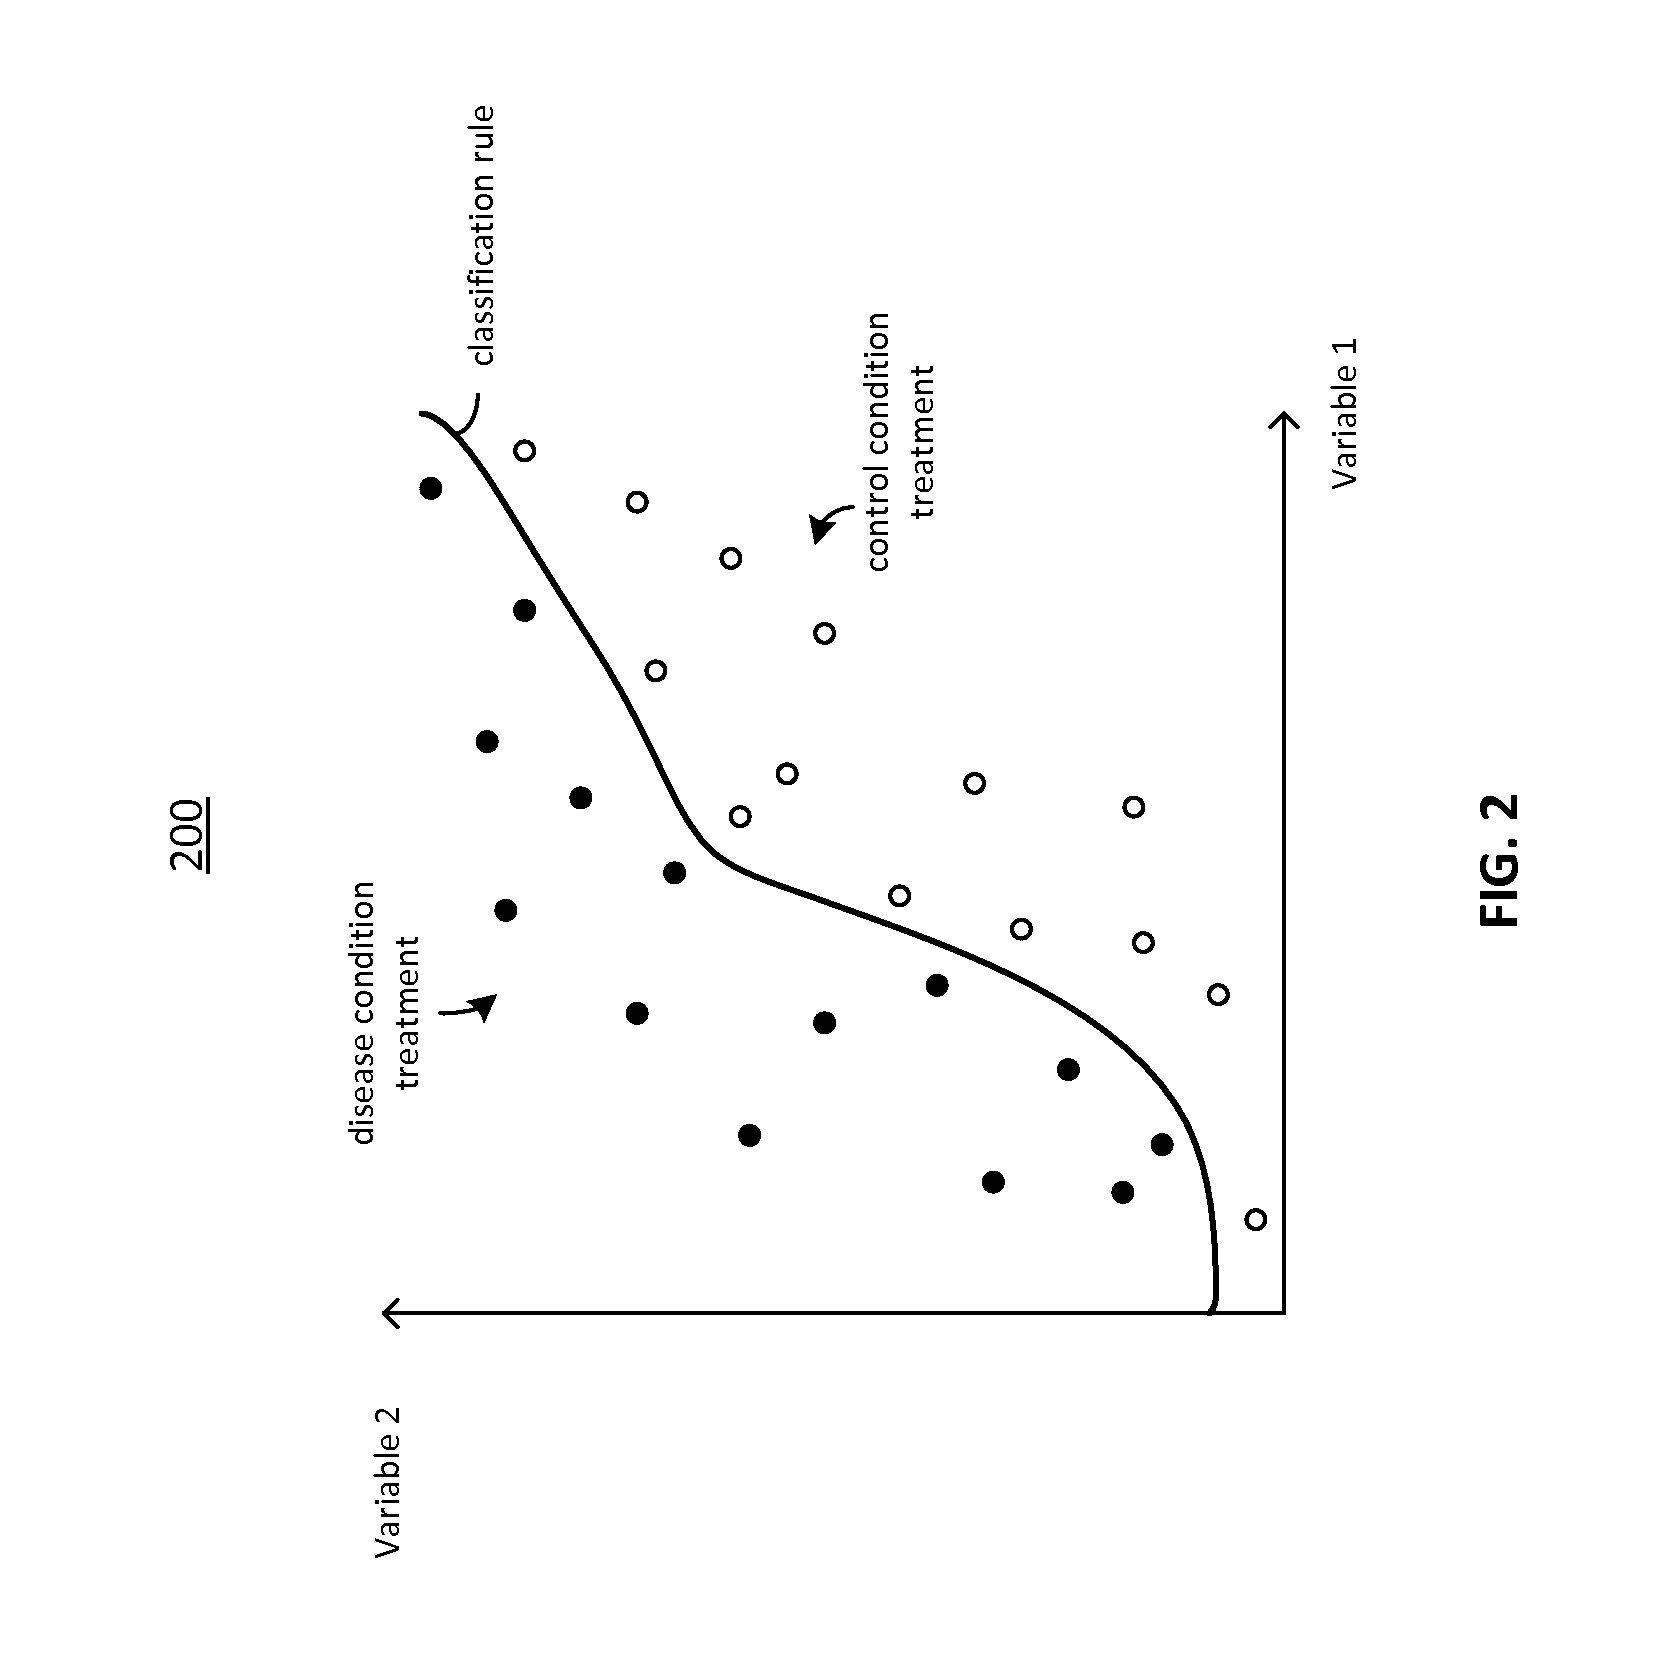 Systems and methods for generating biomarker signatures with integrated dual ensemble and generalized simulated annealing techniques